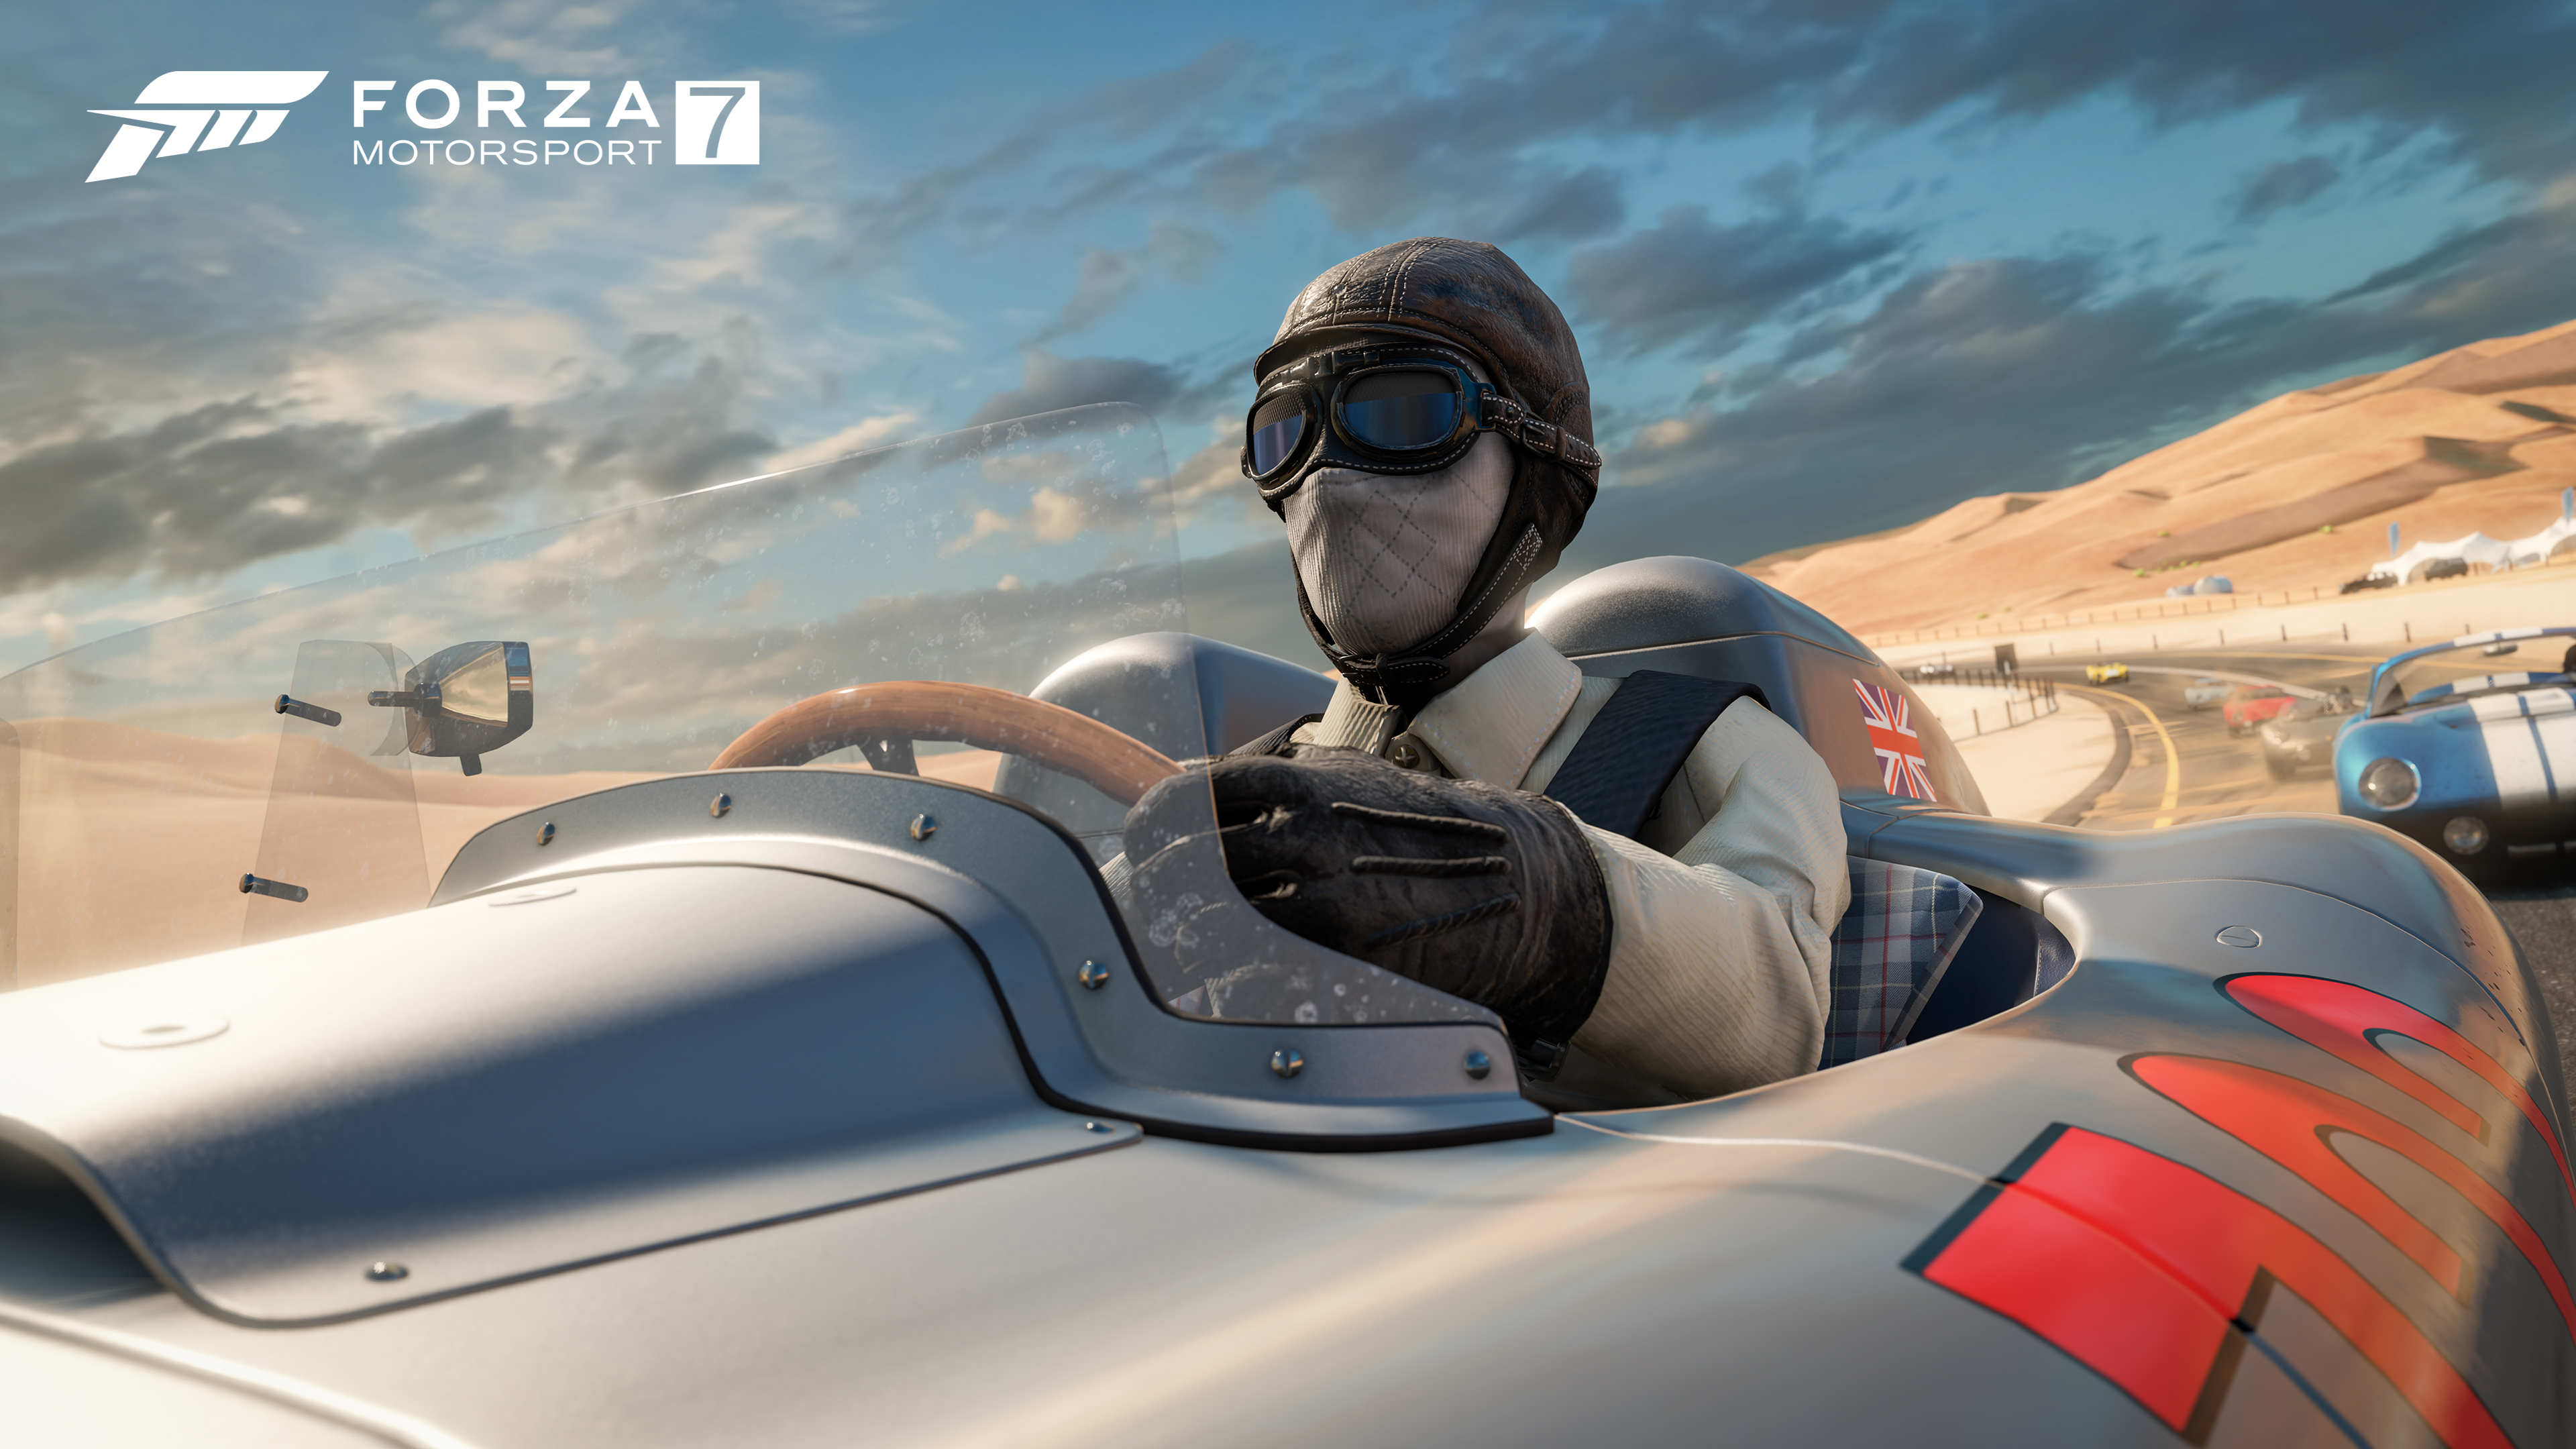 Driver in 1930s racing car from Forza Motorsport 7